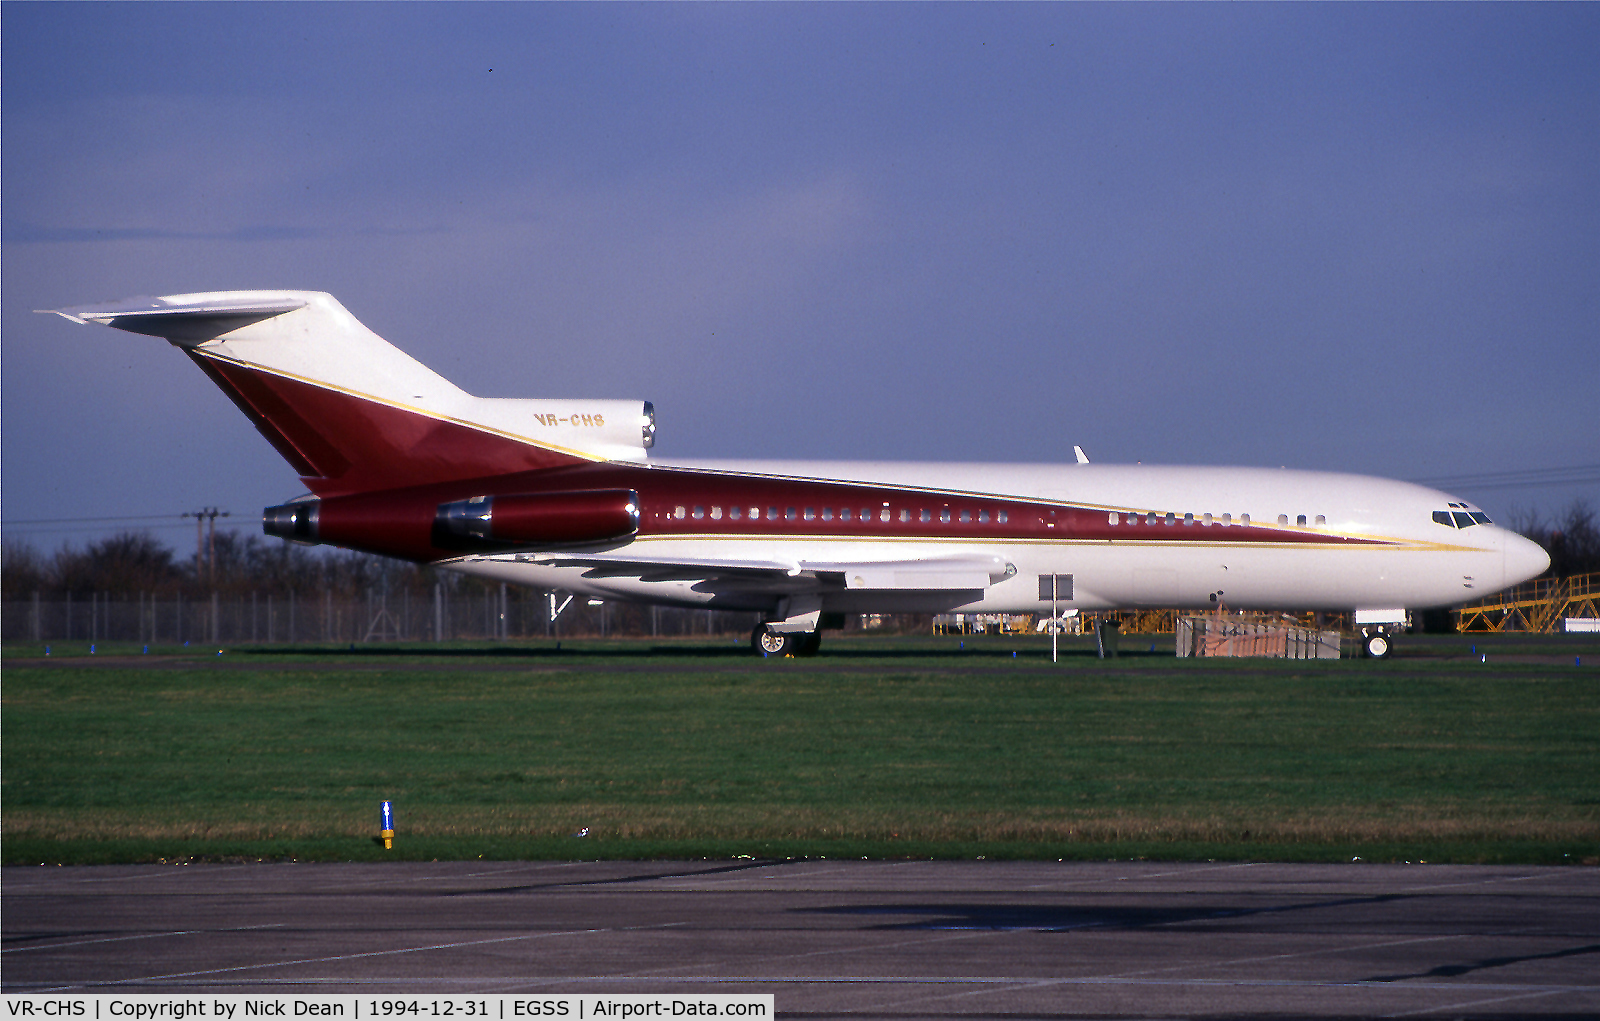 VR-CHS, 1969 Boeing 727-76 C/N 20228, EGSS (Ended its life as JY-HS1 WFU and stored for part out)